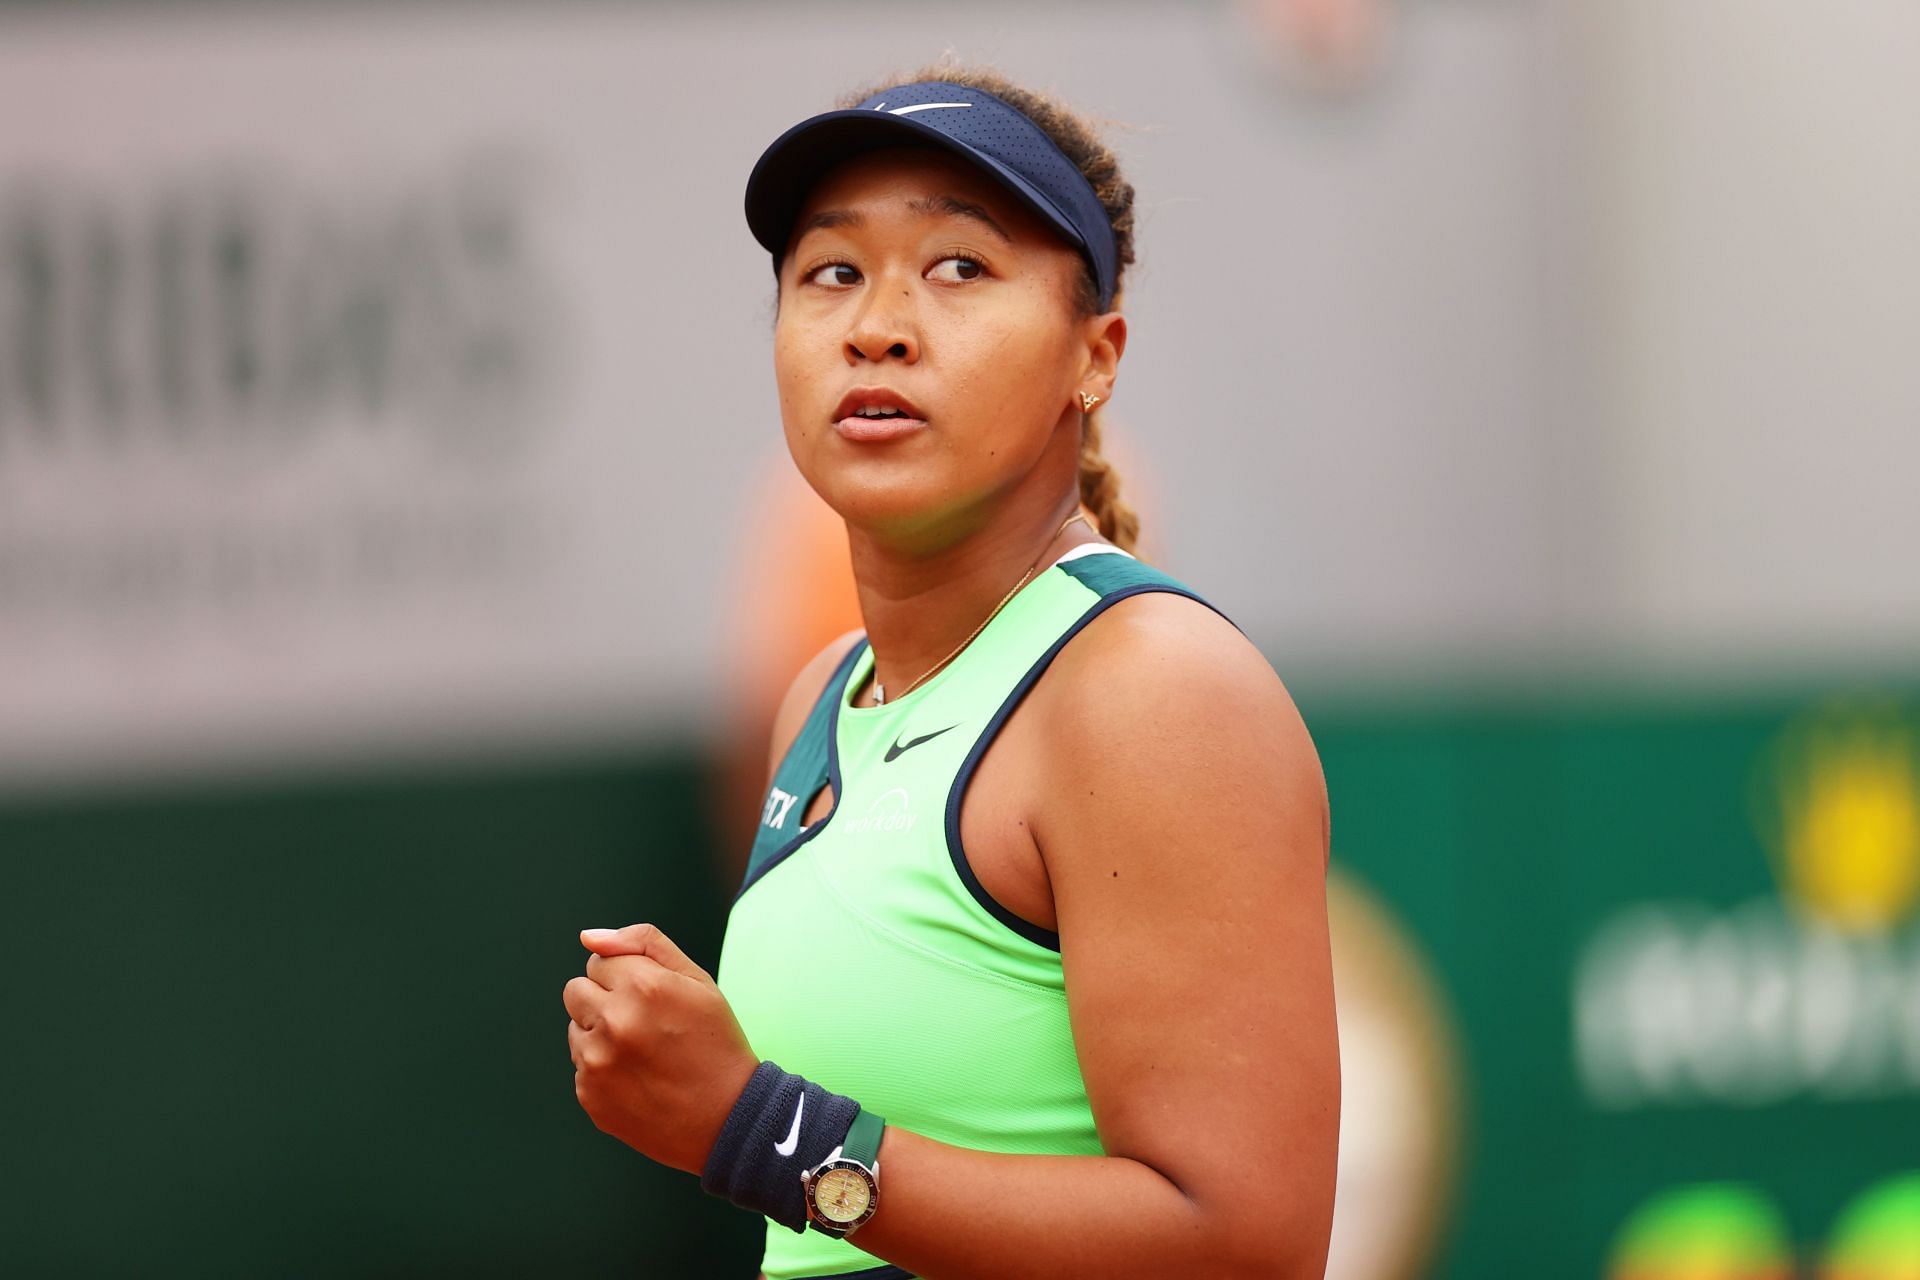 Naomi Osaka explained her Japanese and Haitian culture in an interview with Dazed magazine